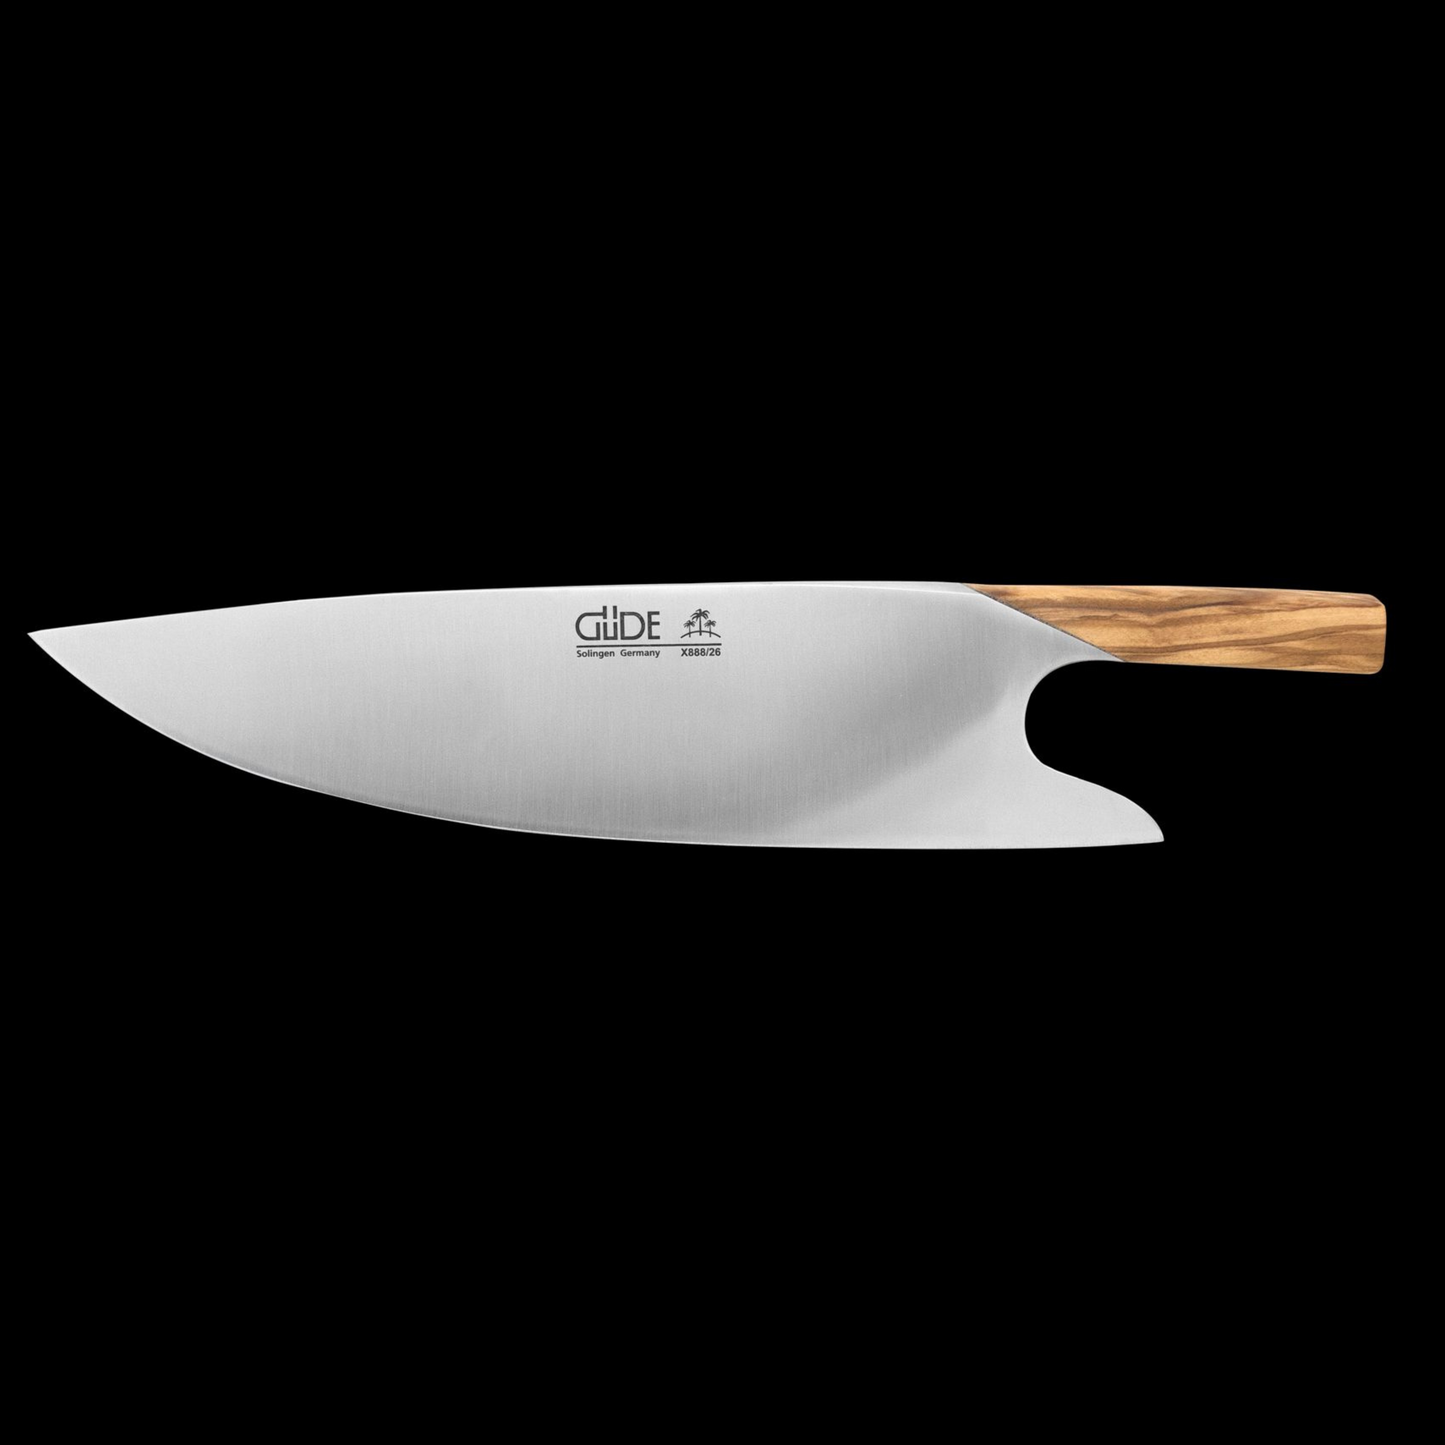 Gude "The Knife" Series Forged Multi-Use Chef's Knife 10", Olive Wood Handle - GuedeUSA